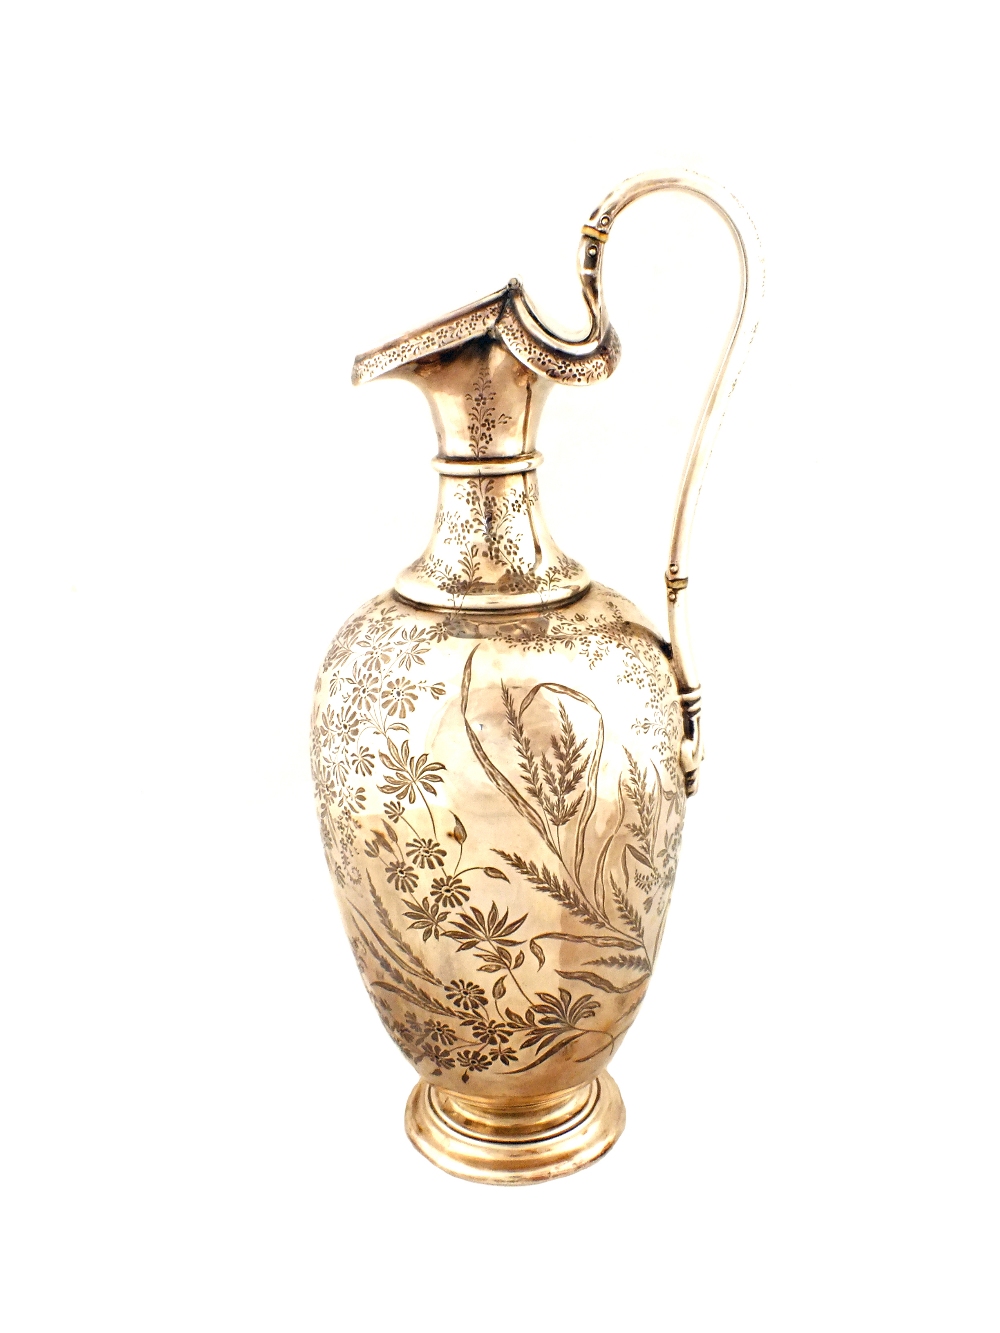 A Silver hot water jug with floral engraving,